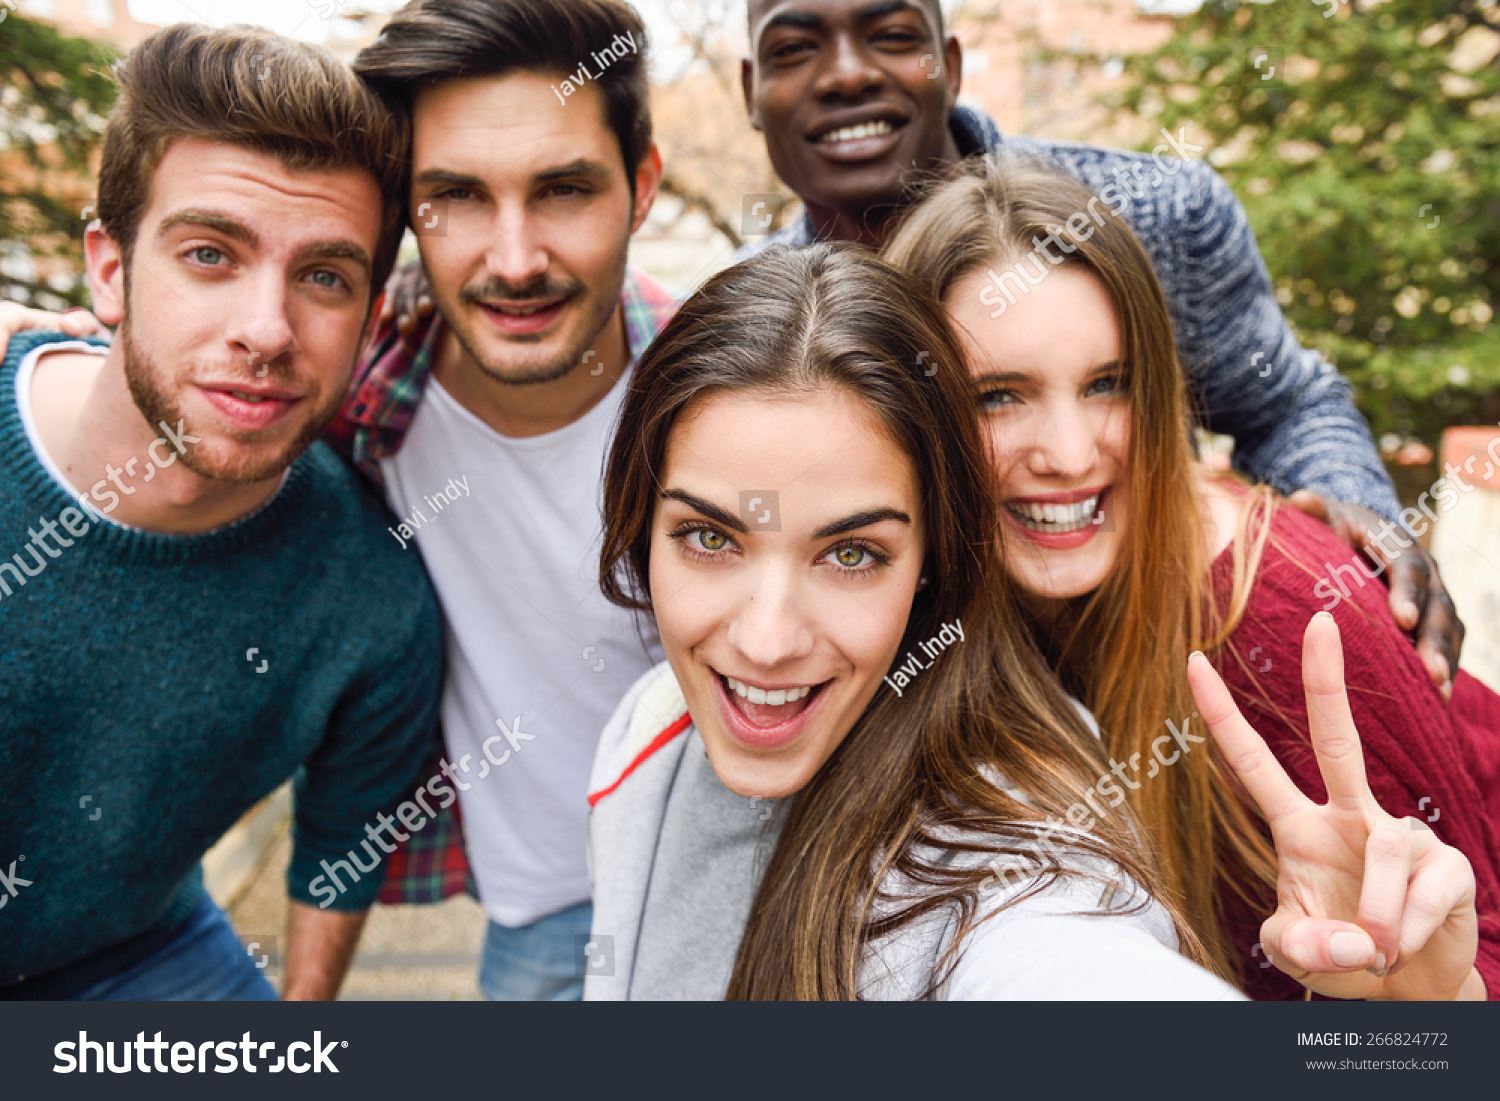 Group of multi-ethnic young people having fun together outdoors #266824772